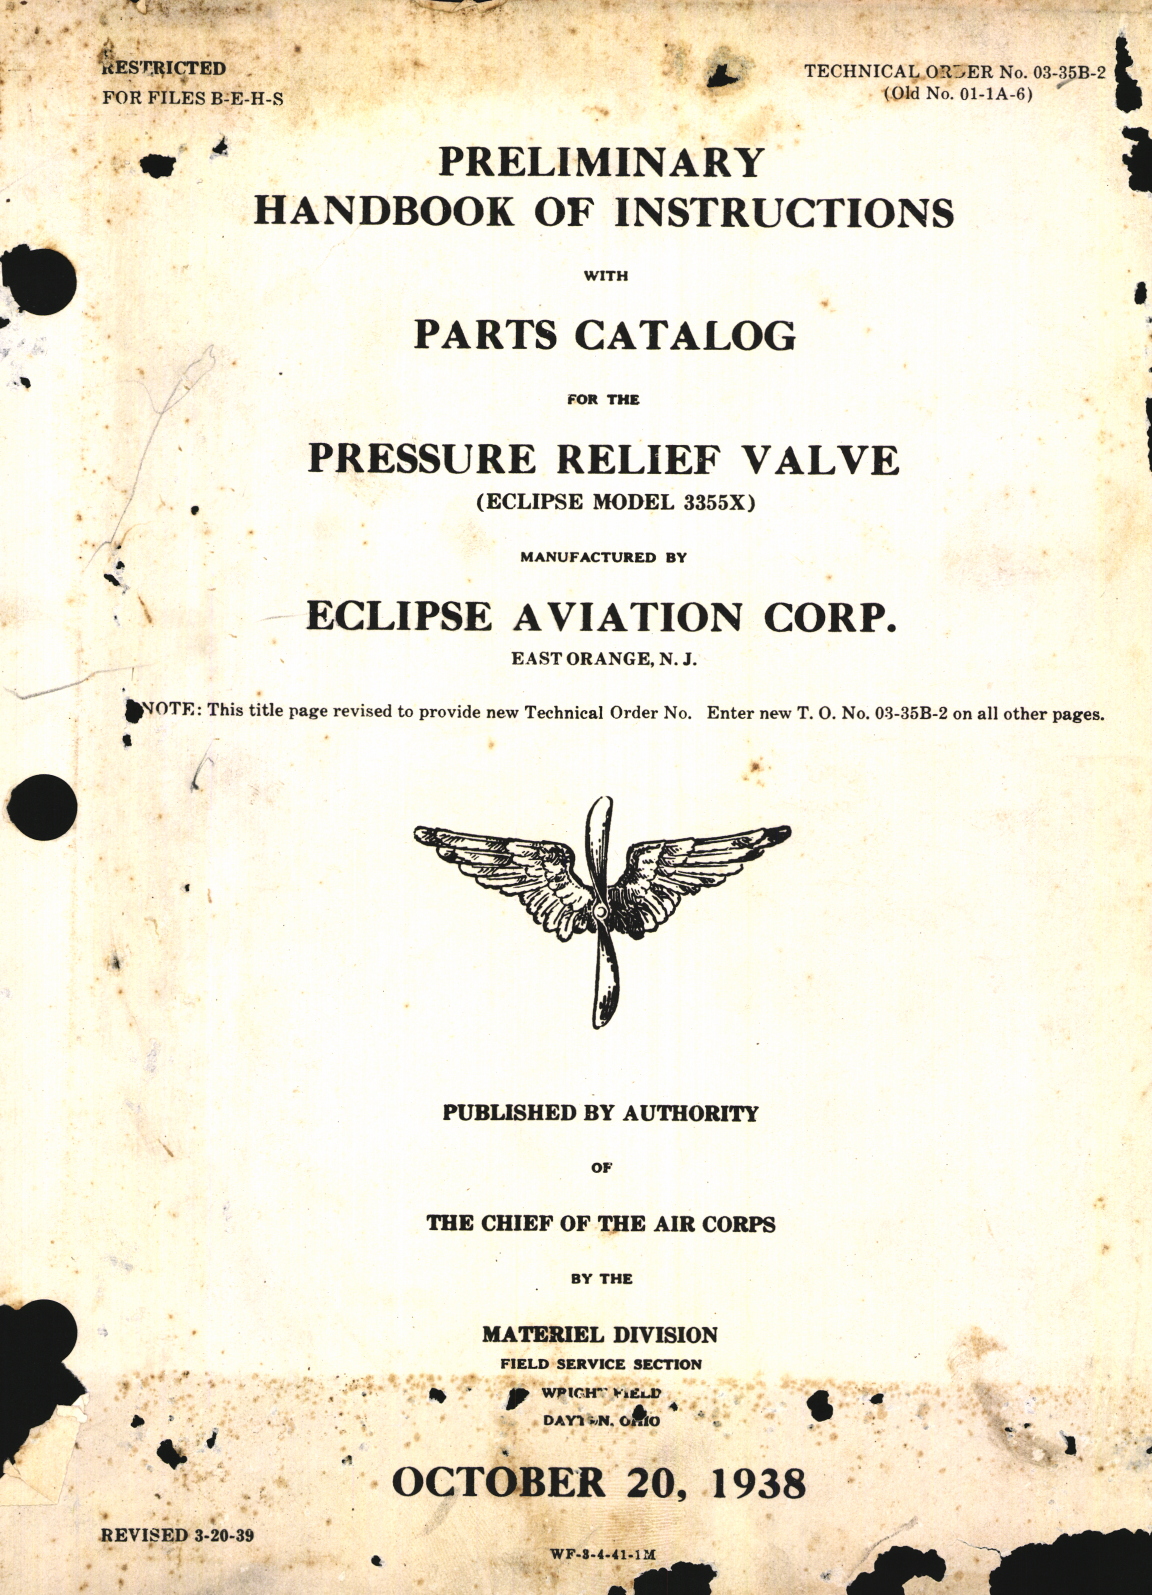 Sample page 1 from AirCorps Library document: Preliminary Handbook of Instructions with Parts Catalog for Pressure Relief Valve Model 3355X